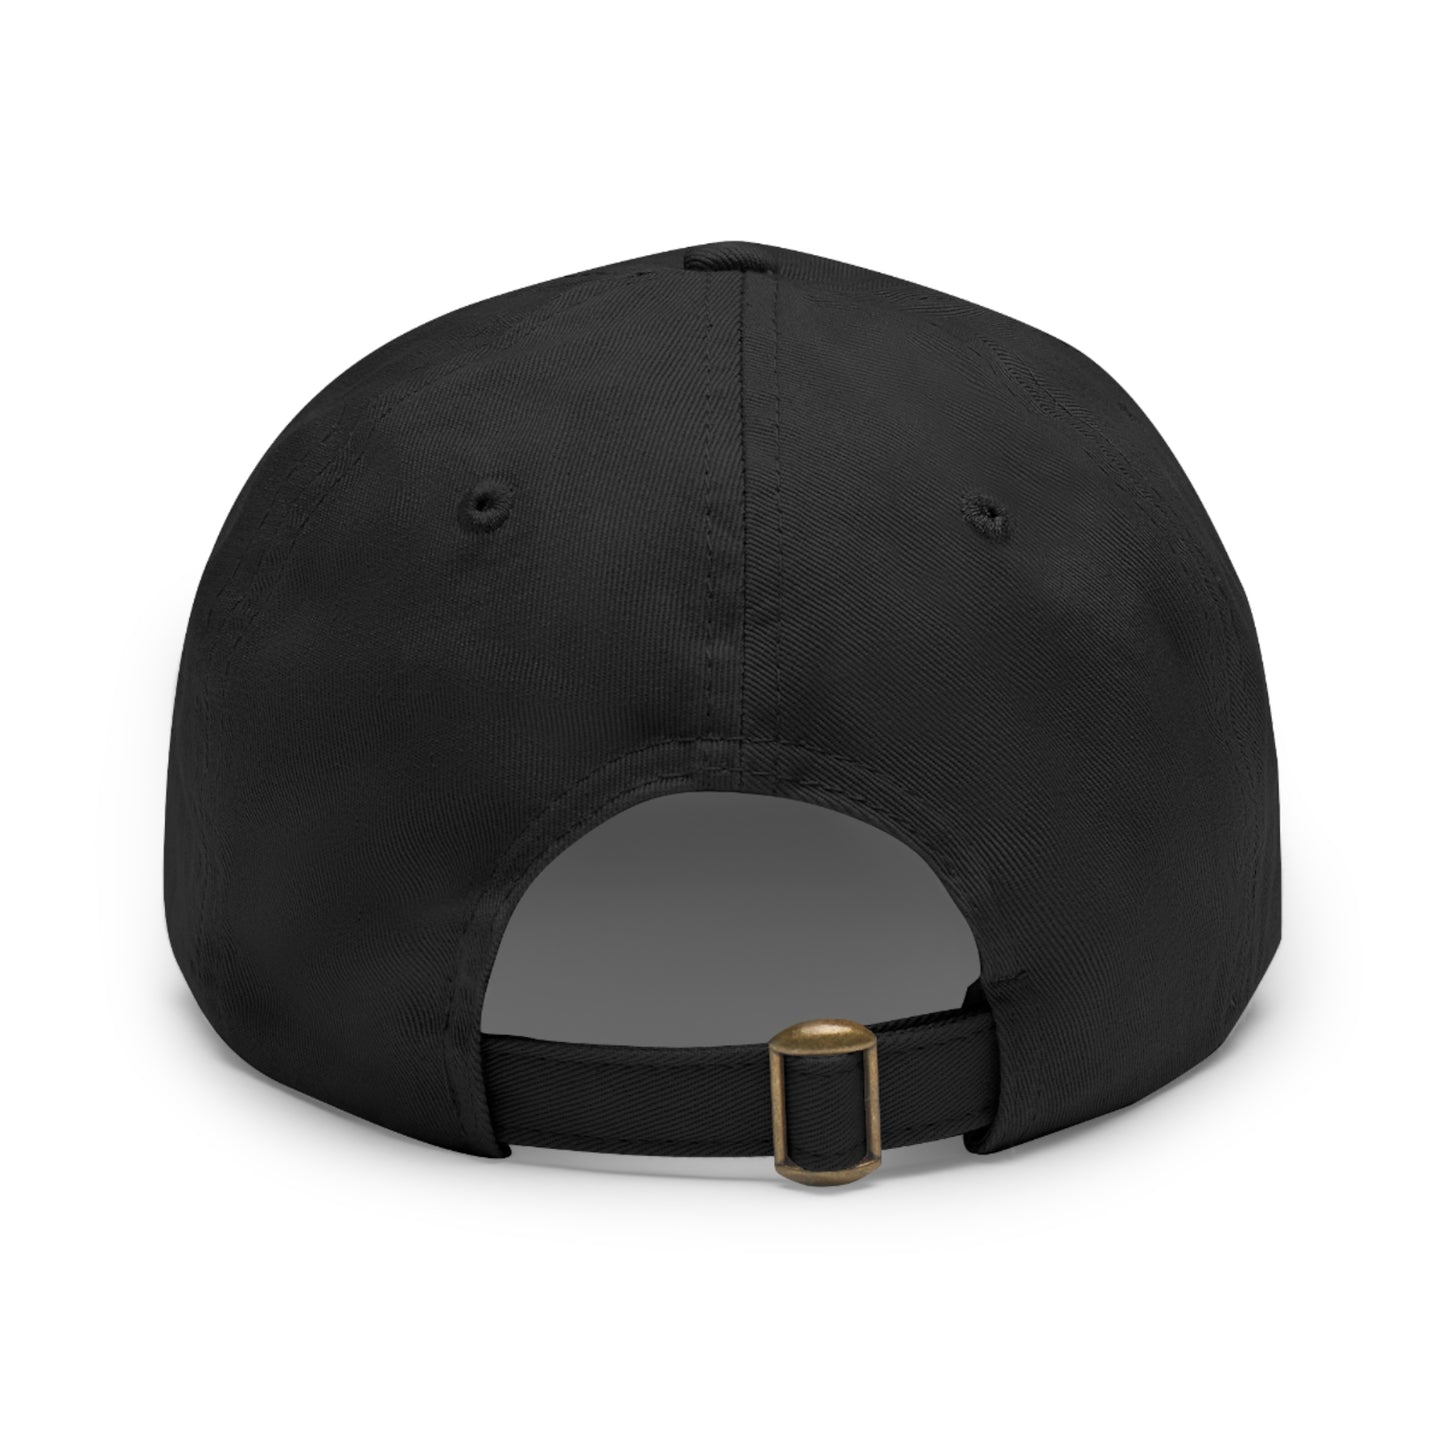 ROBBY'S RECORDS Dad's Hat with Leather Patch (Rectangle)